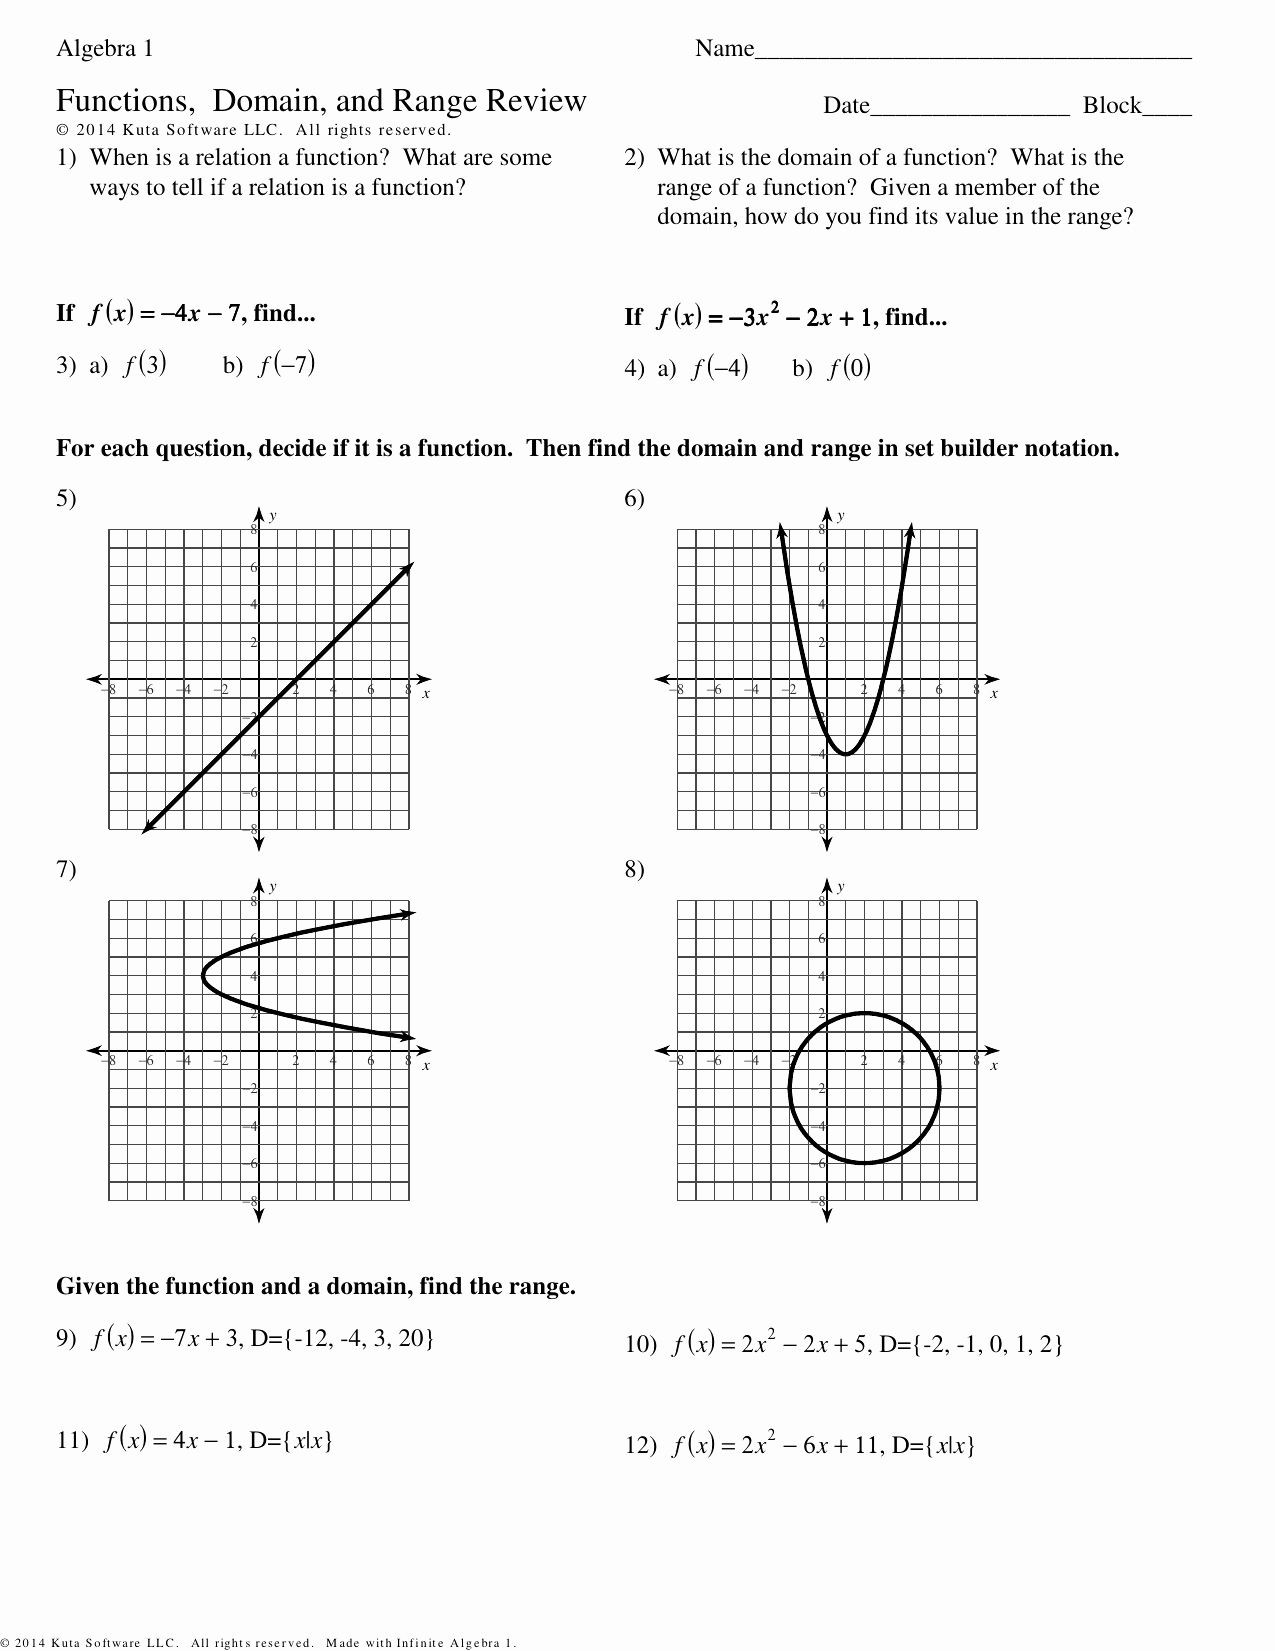 Domain and Range Practice Worksheet Domain and Range Worksheet 1 Promotiontablecovers